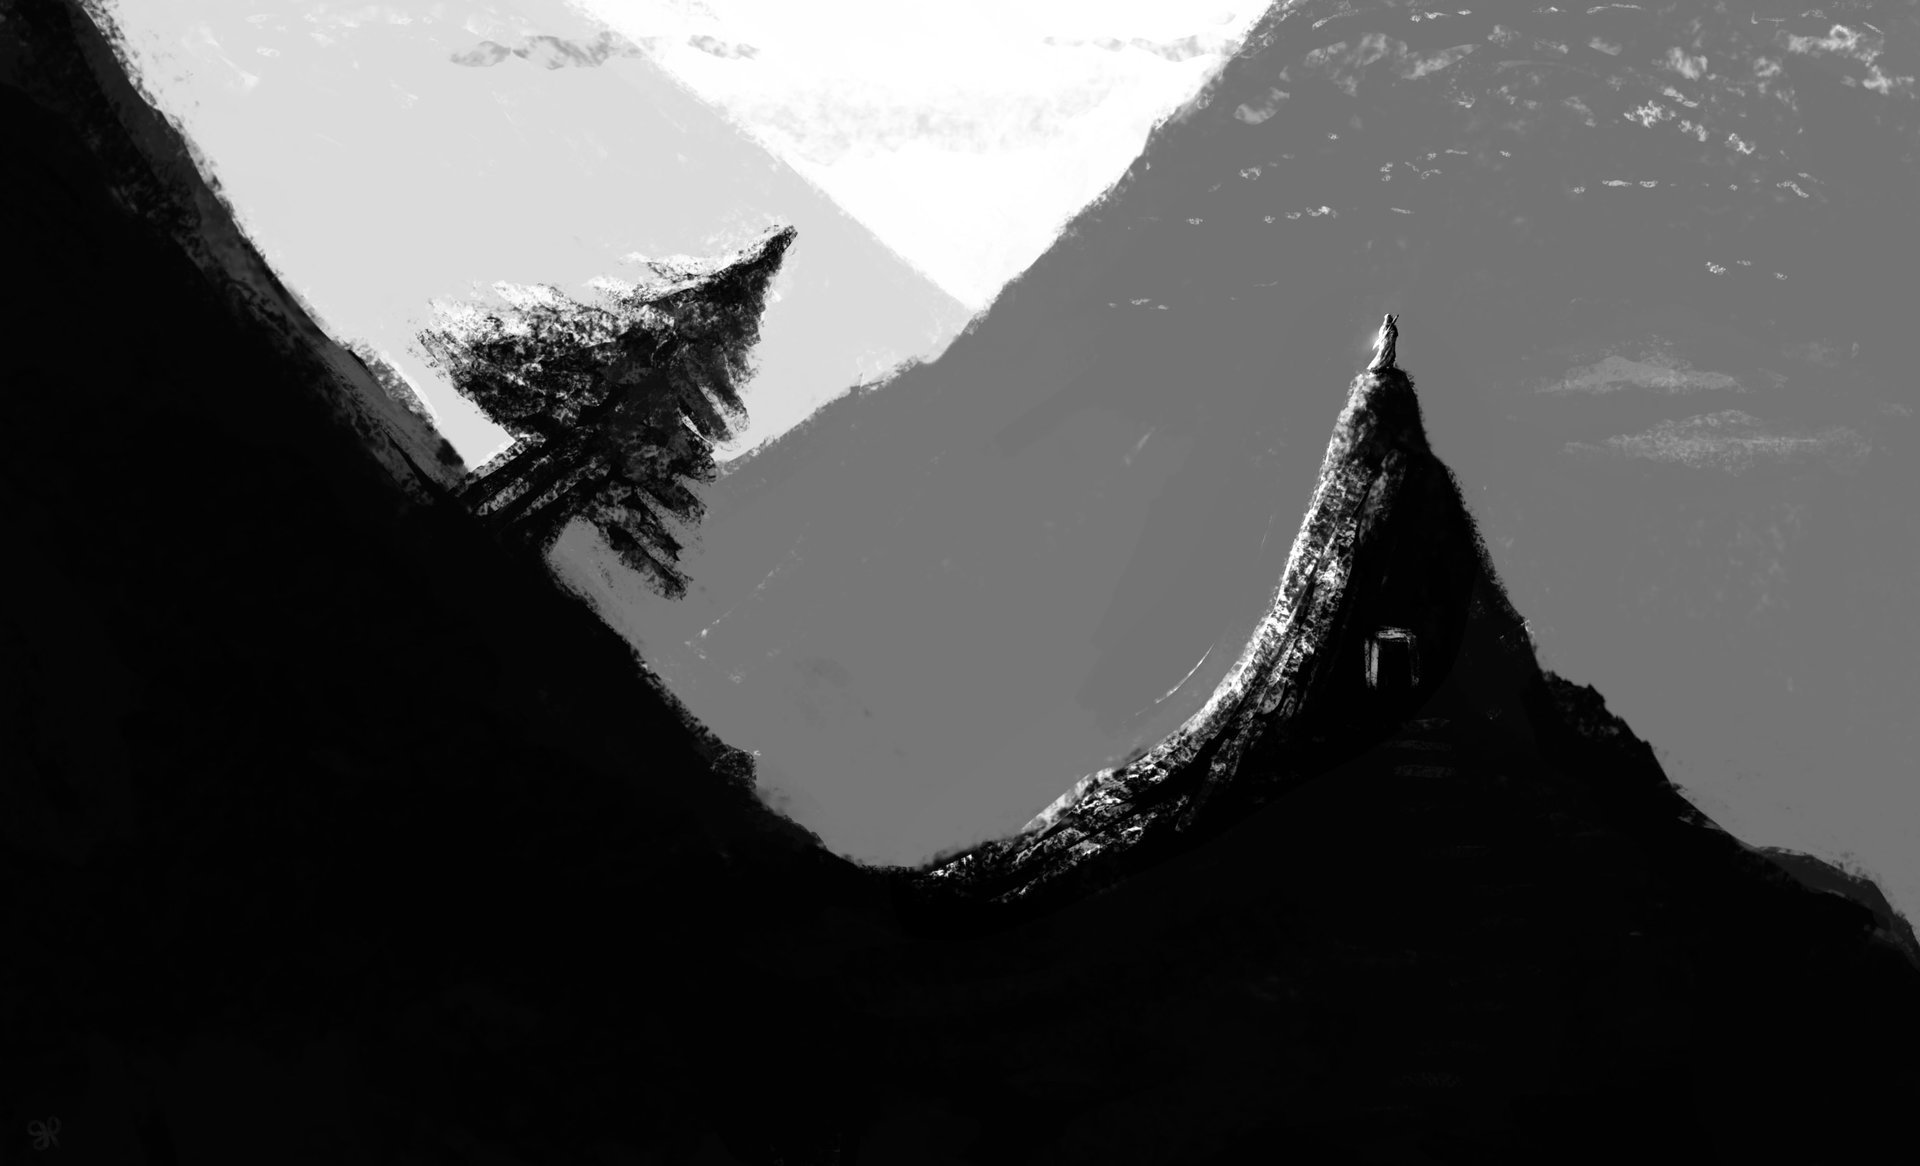 Ninja Silhouette in the Mountains